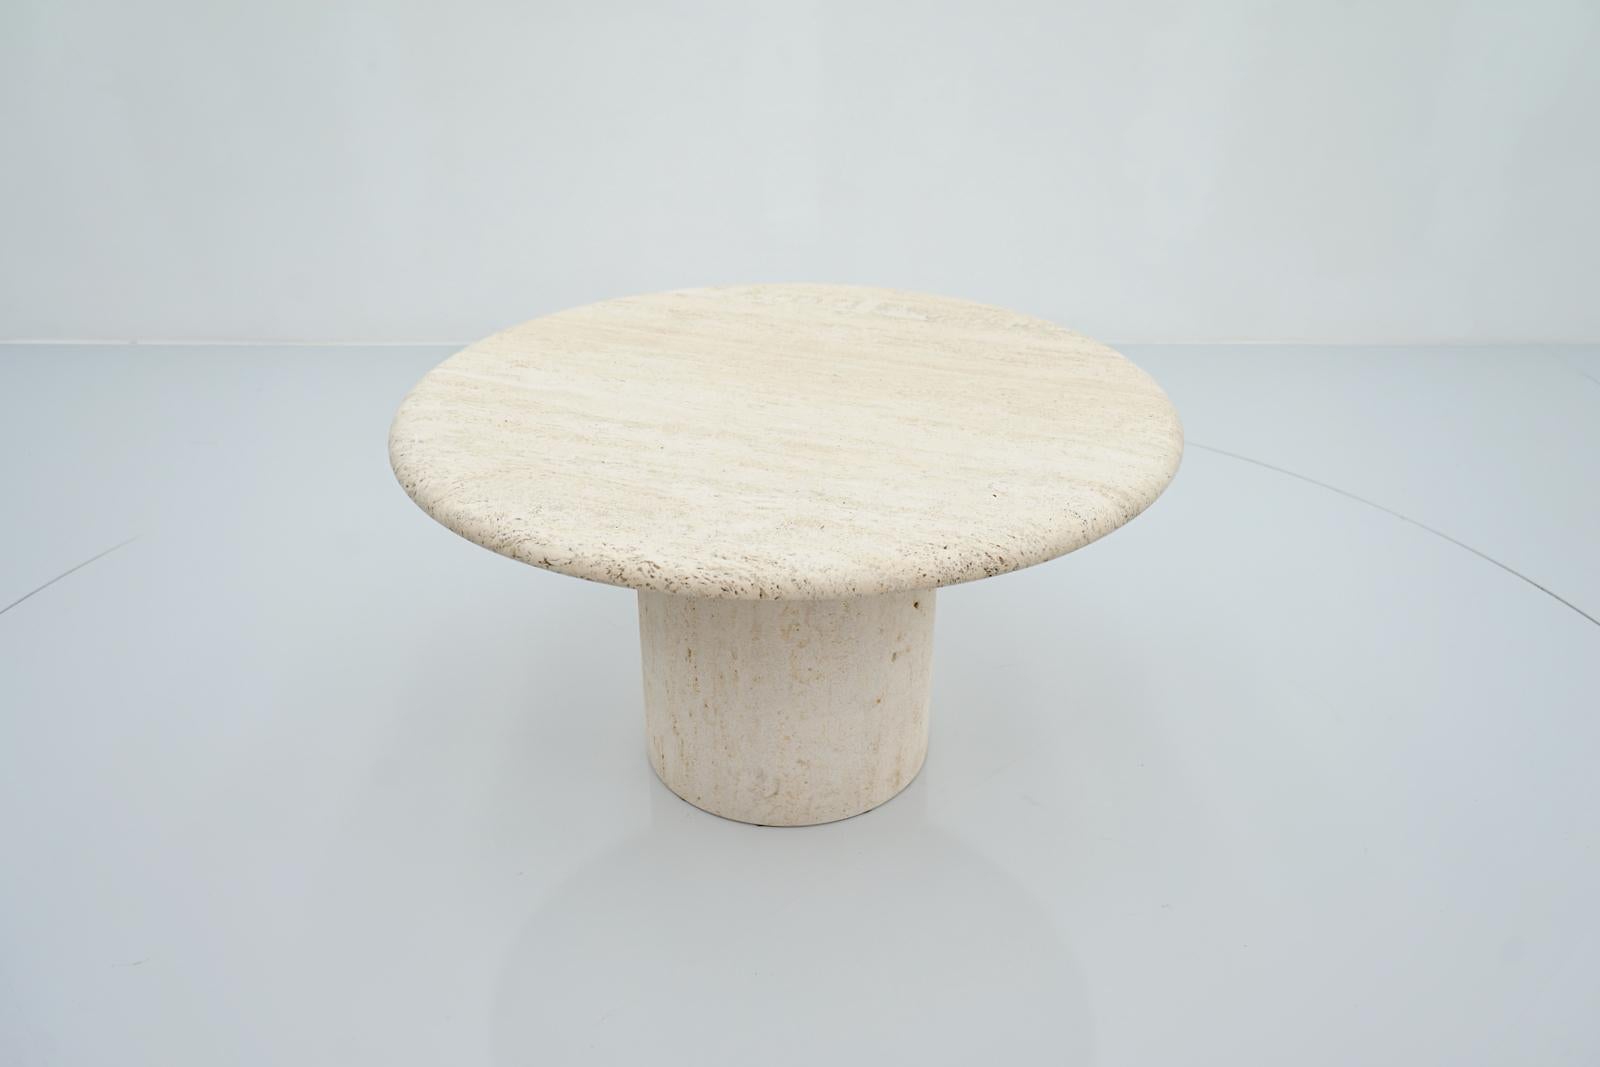 Round coffee table in Italian Travertine stone by Up & Up Italy, 1970s
Very good condition.